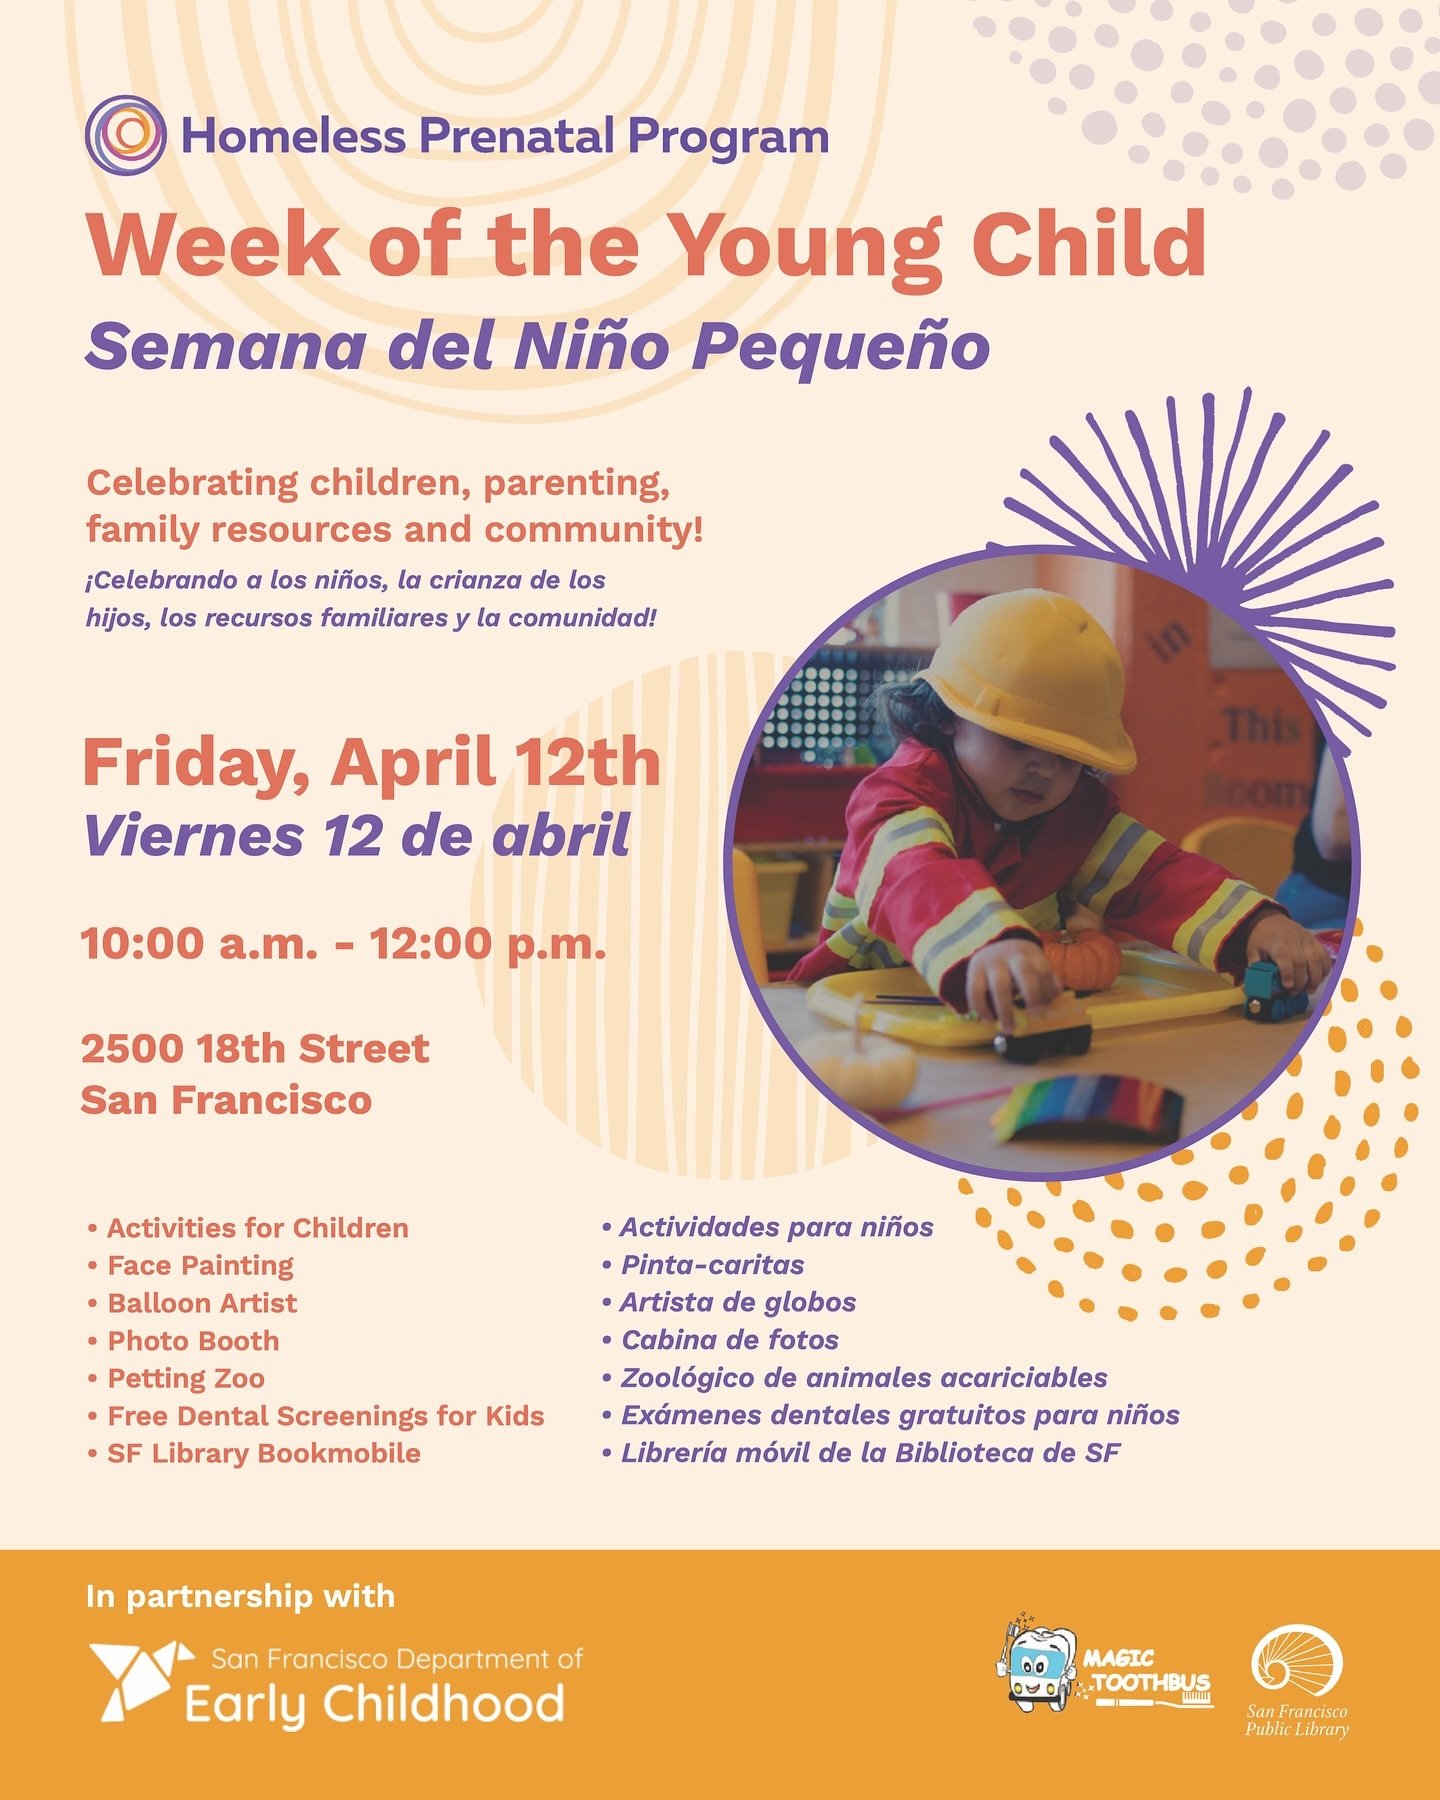 All week long HPP is hosting events as part of @sanfranciscodec&rsquo;s Week of the Young Child. Join us on Friday, April 12th from 10-12pm at HPP for a celebration of children, parenting and community!